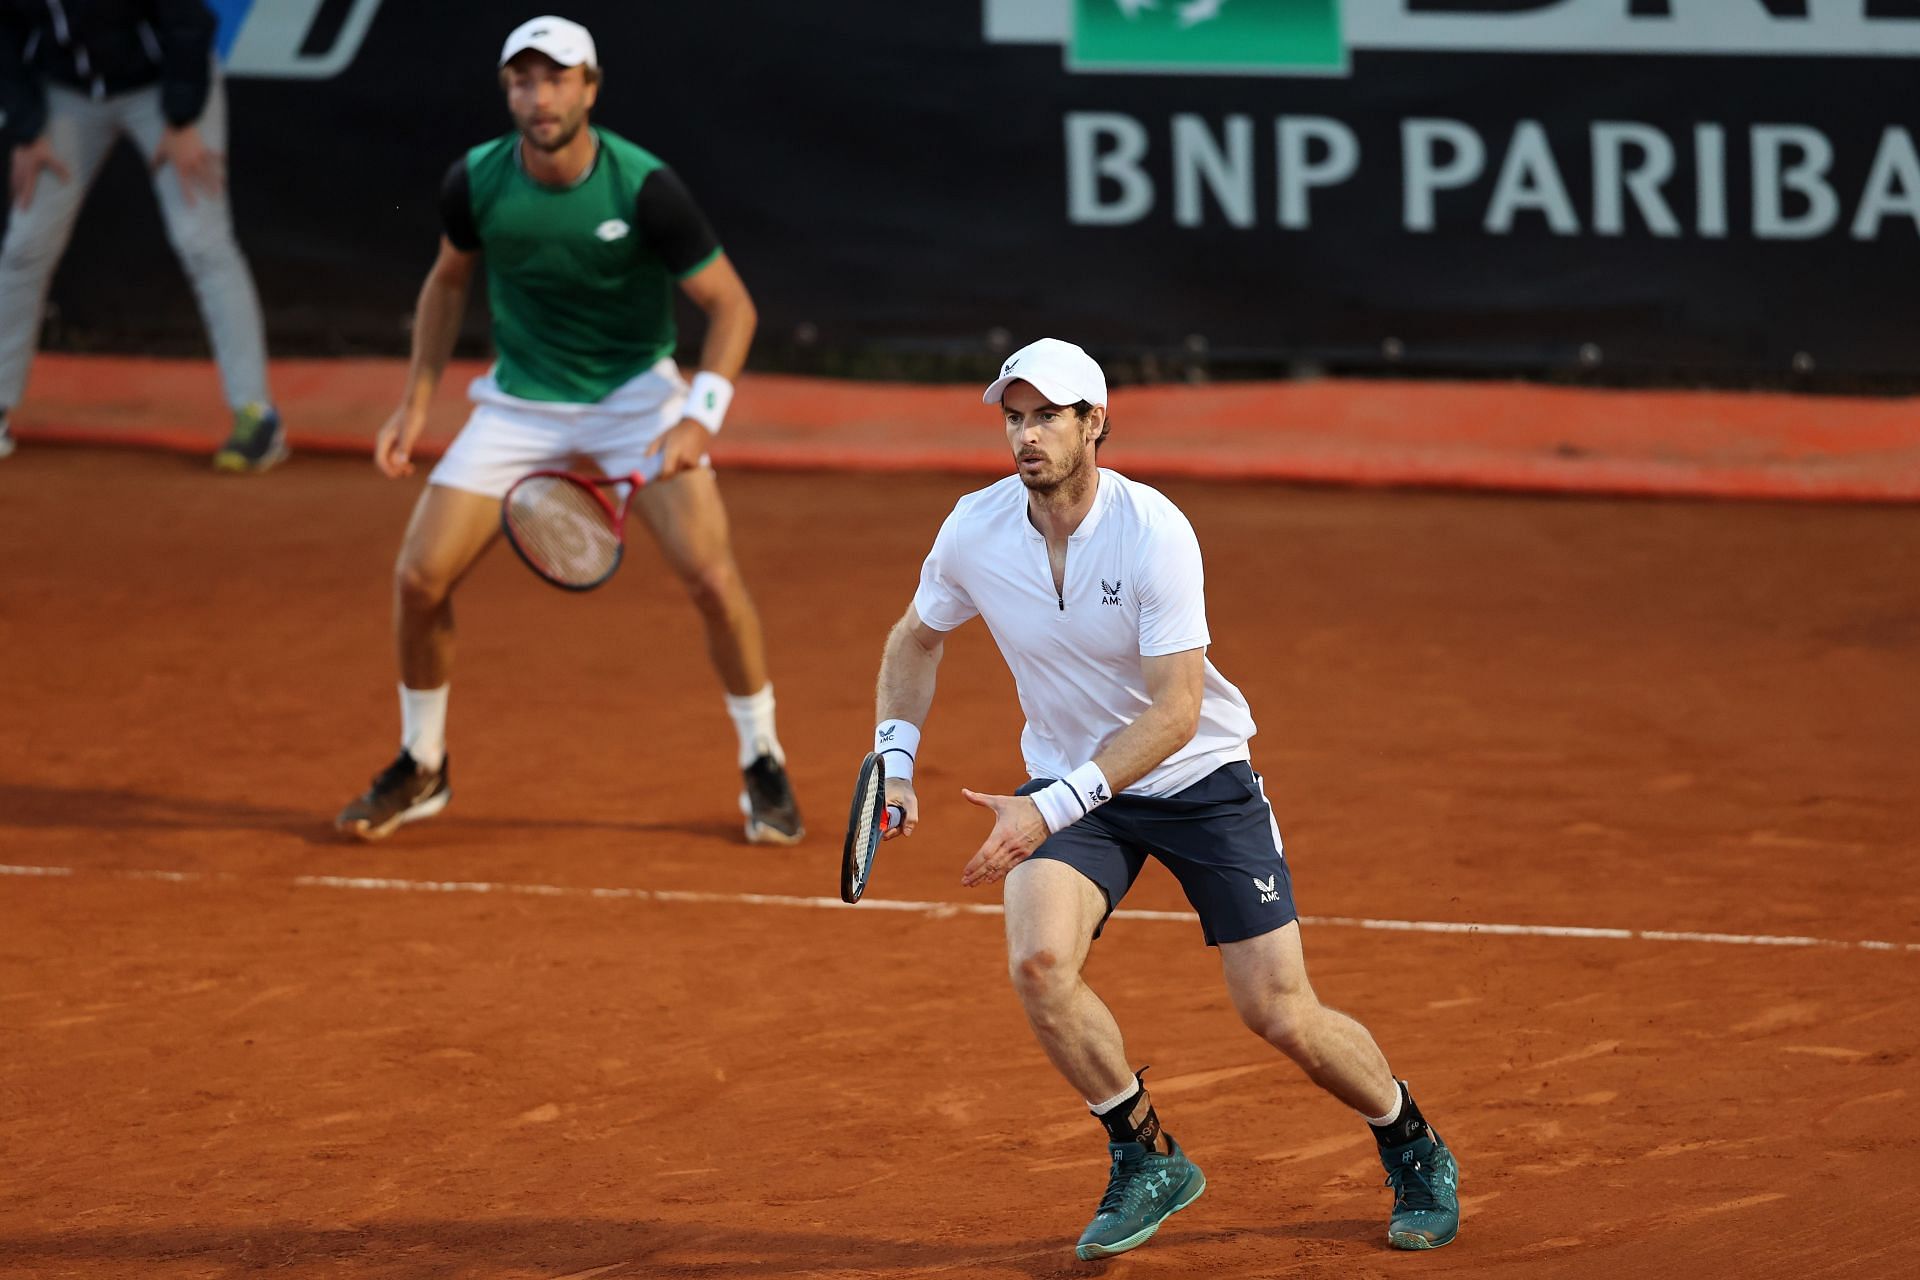 Liam Broady partnering with Andy Murray at the BNP Paribas Open.